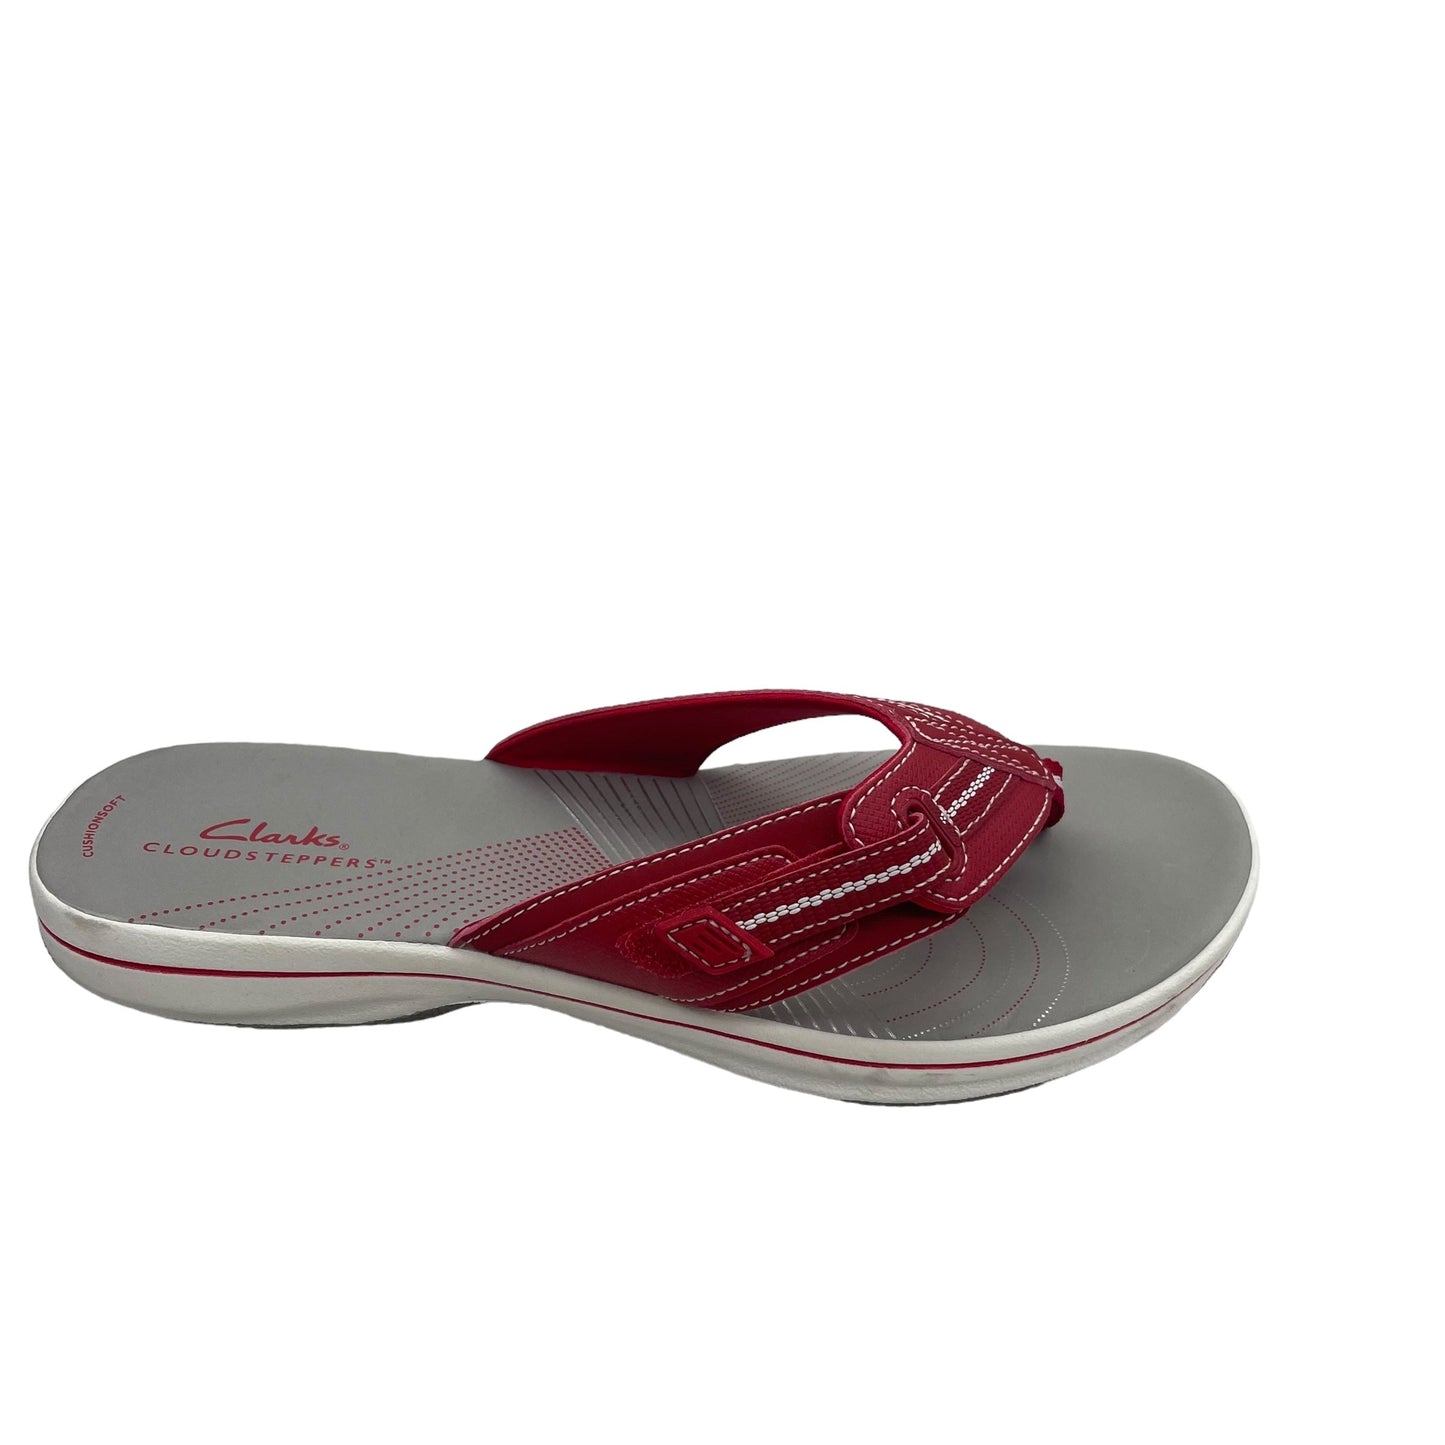 RED CLARKS SANDALS FLATS, Size 9